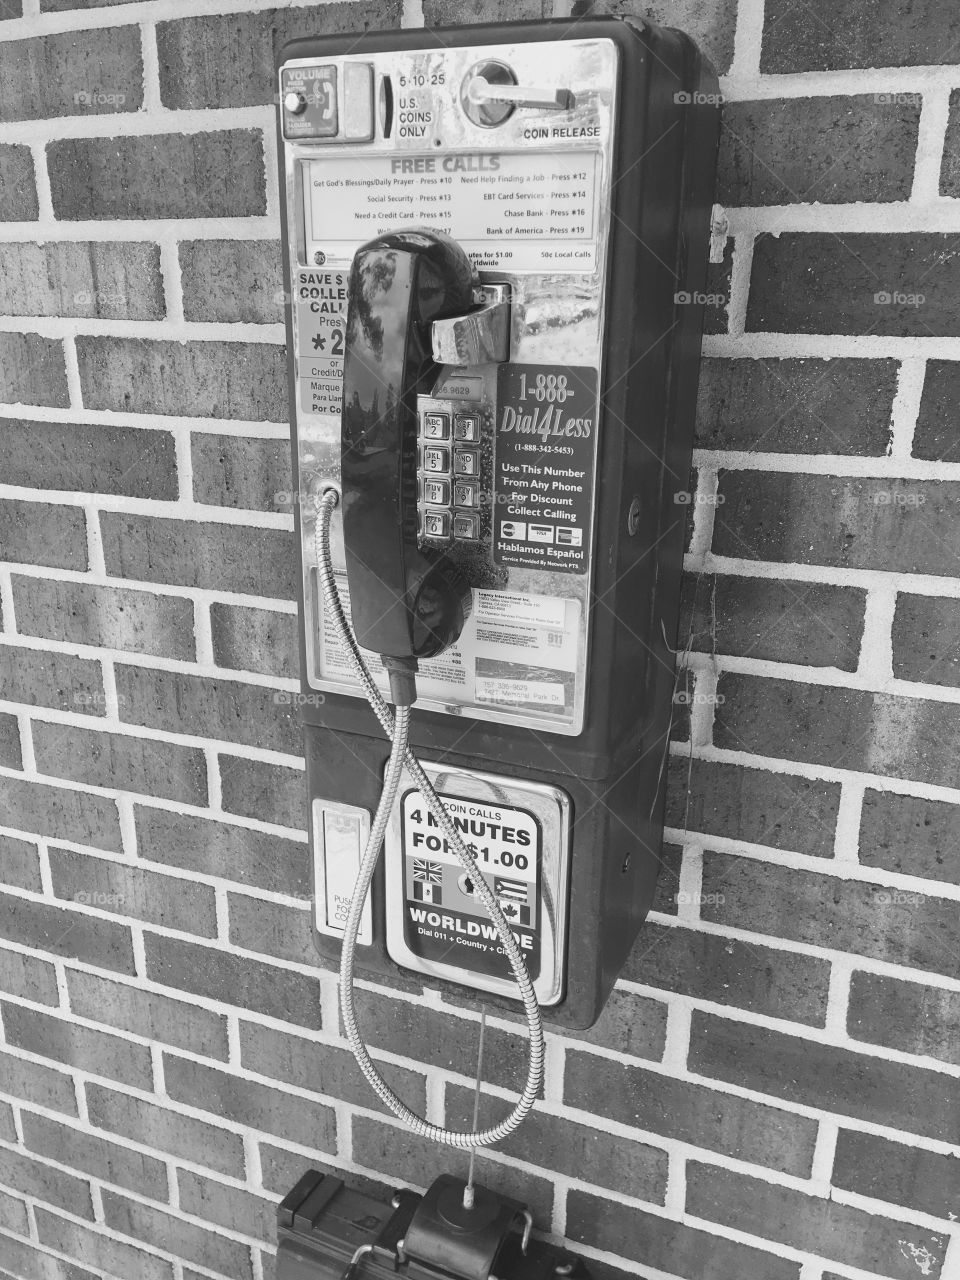 An old inoperable phone